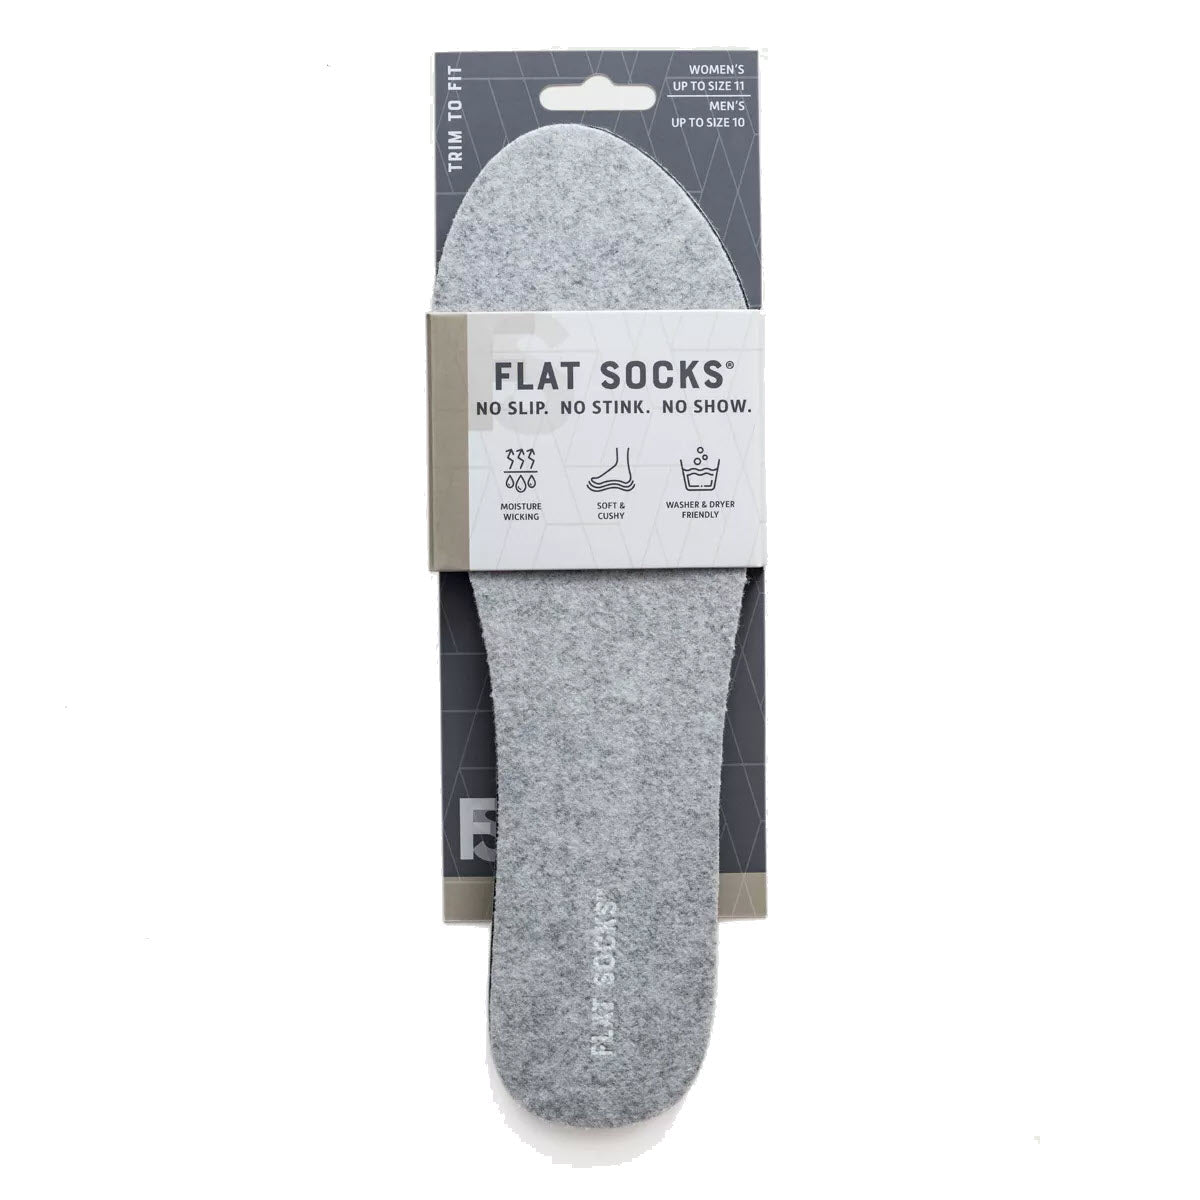 A Flat Socks Light Gray - Mens flat sock displayed in front of its packaging, which is labeled "FLAT SOCKS, no slip, no stink, no show.